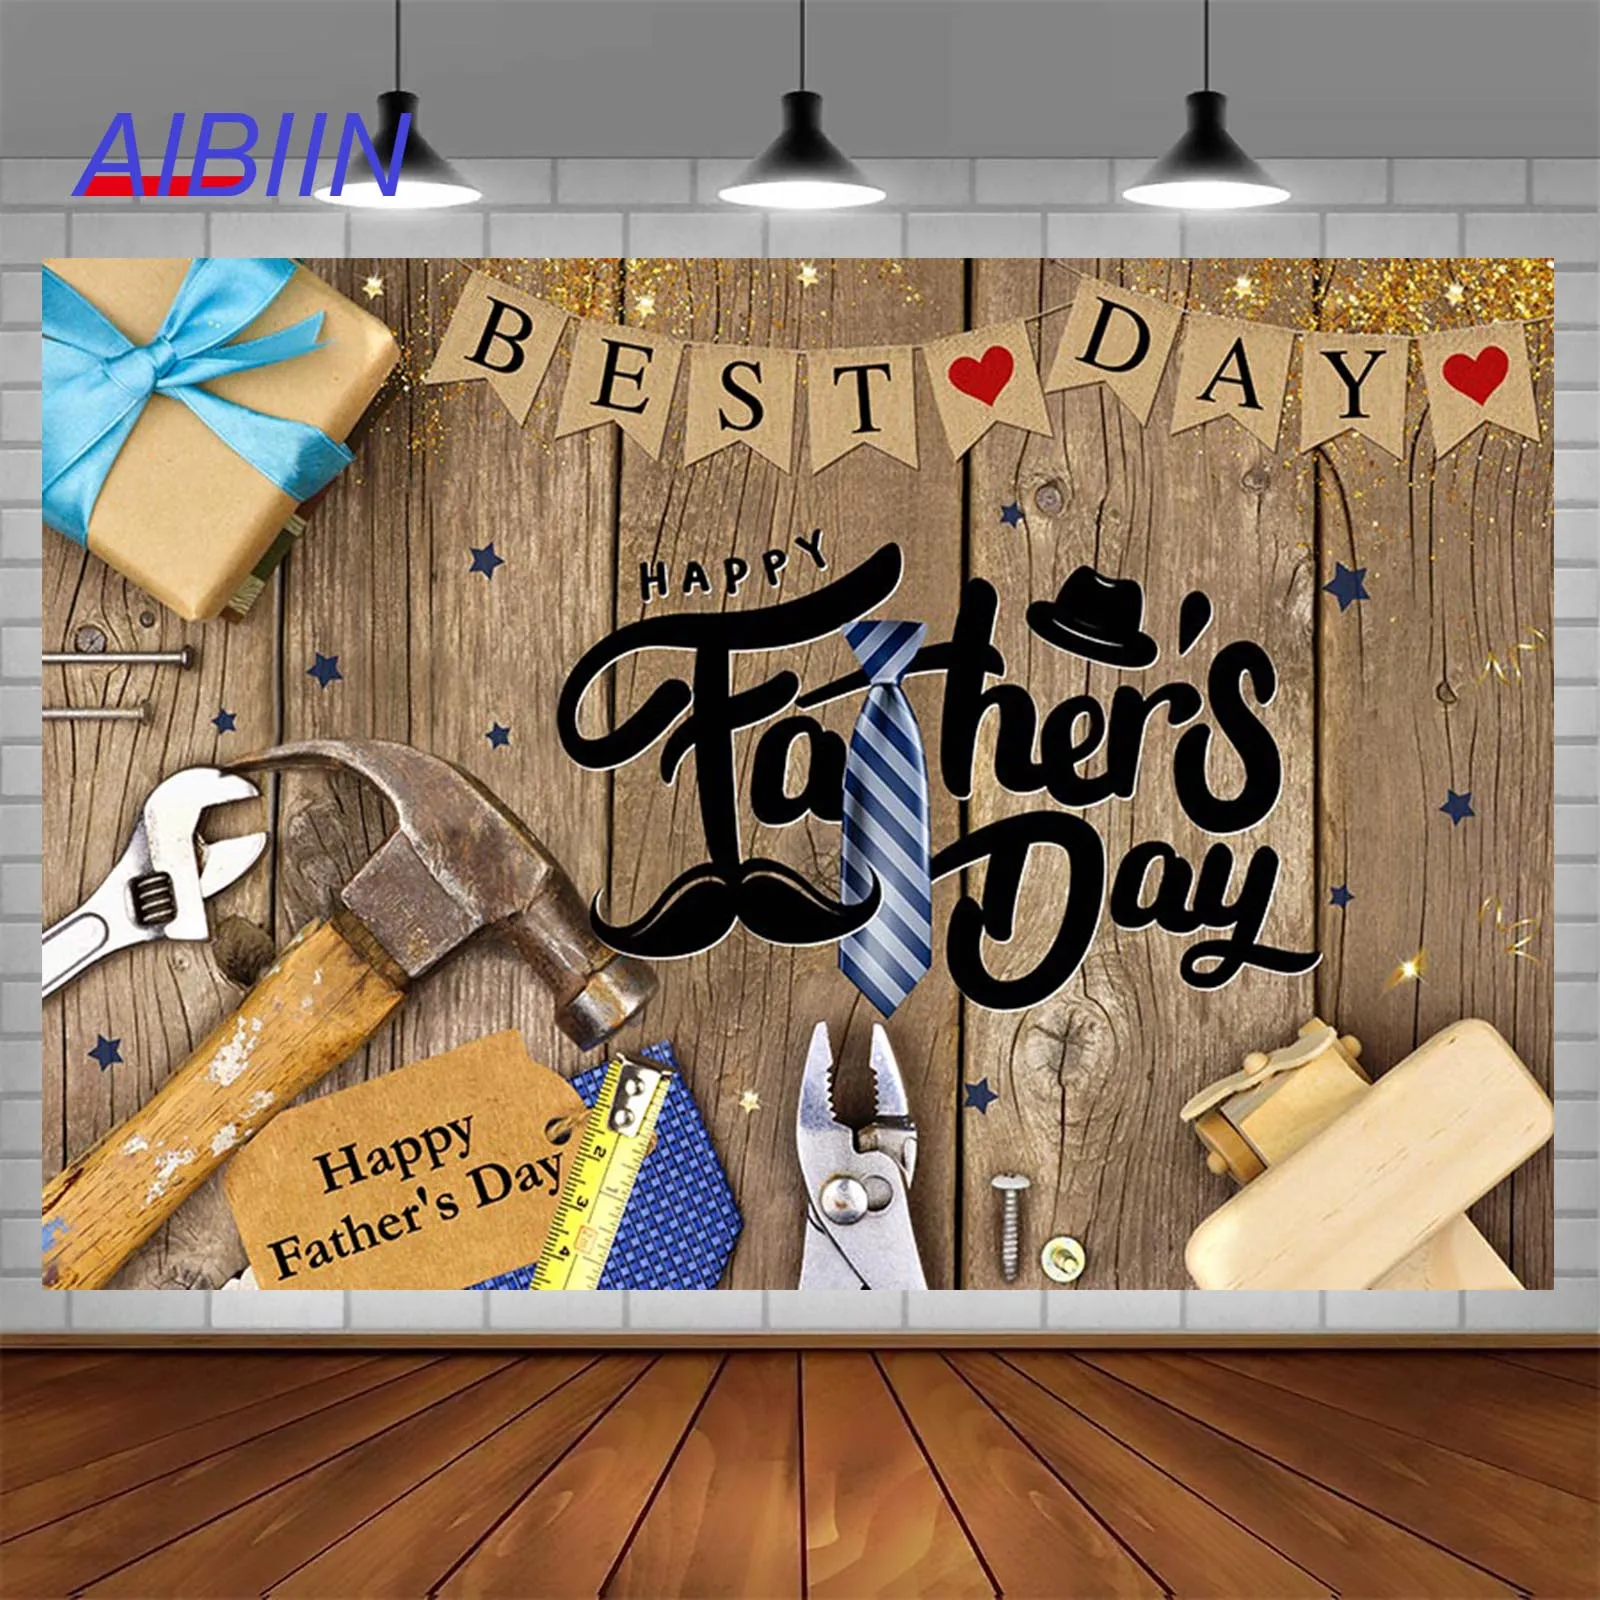 

AIBIIN Happy Father's Day Photography Backdrop Tie Tools Best Day Wooden Background Party Decoration for Father Man